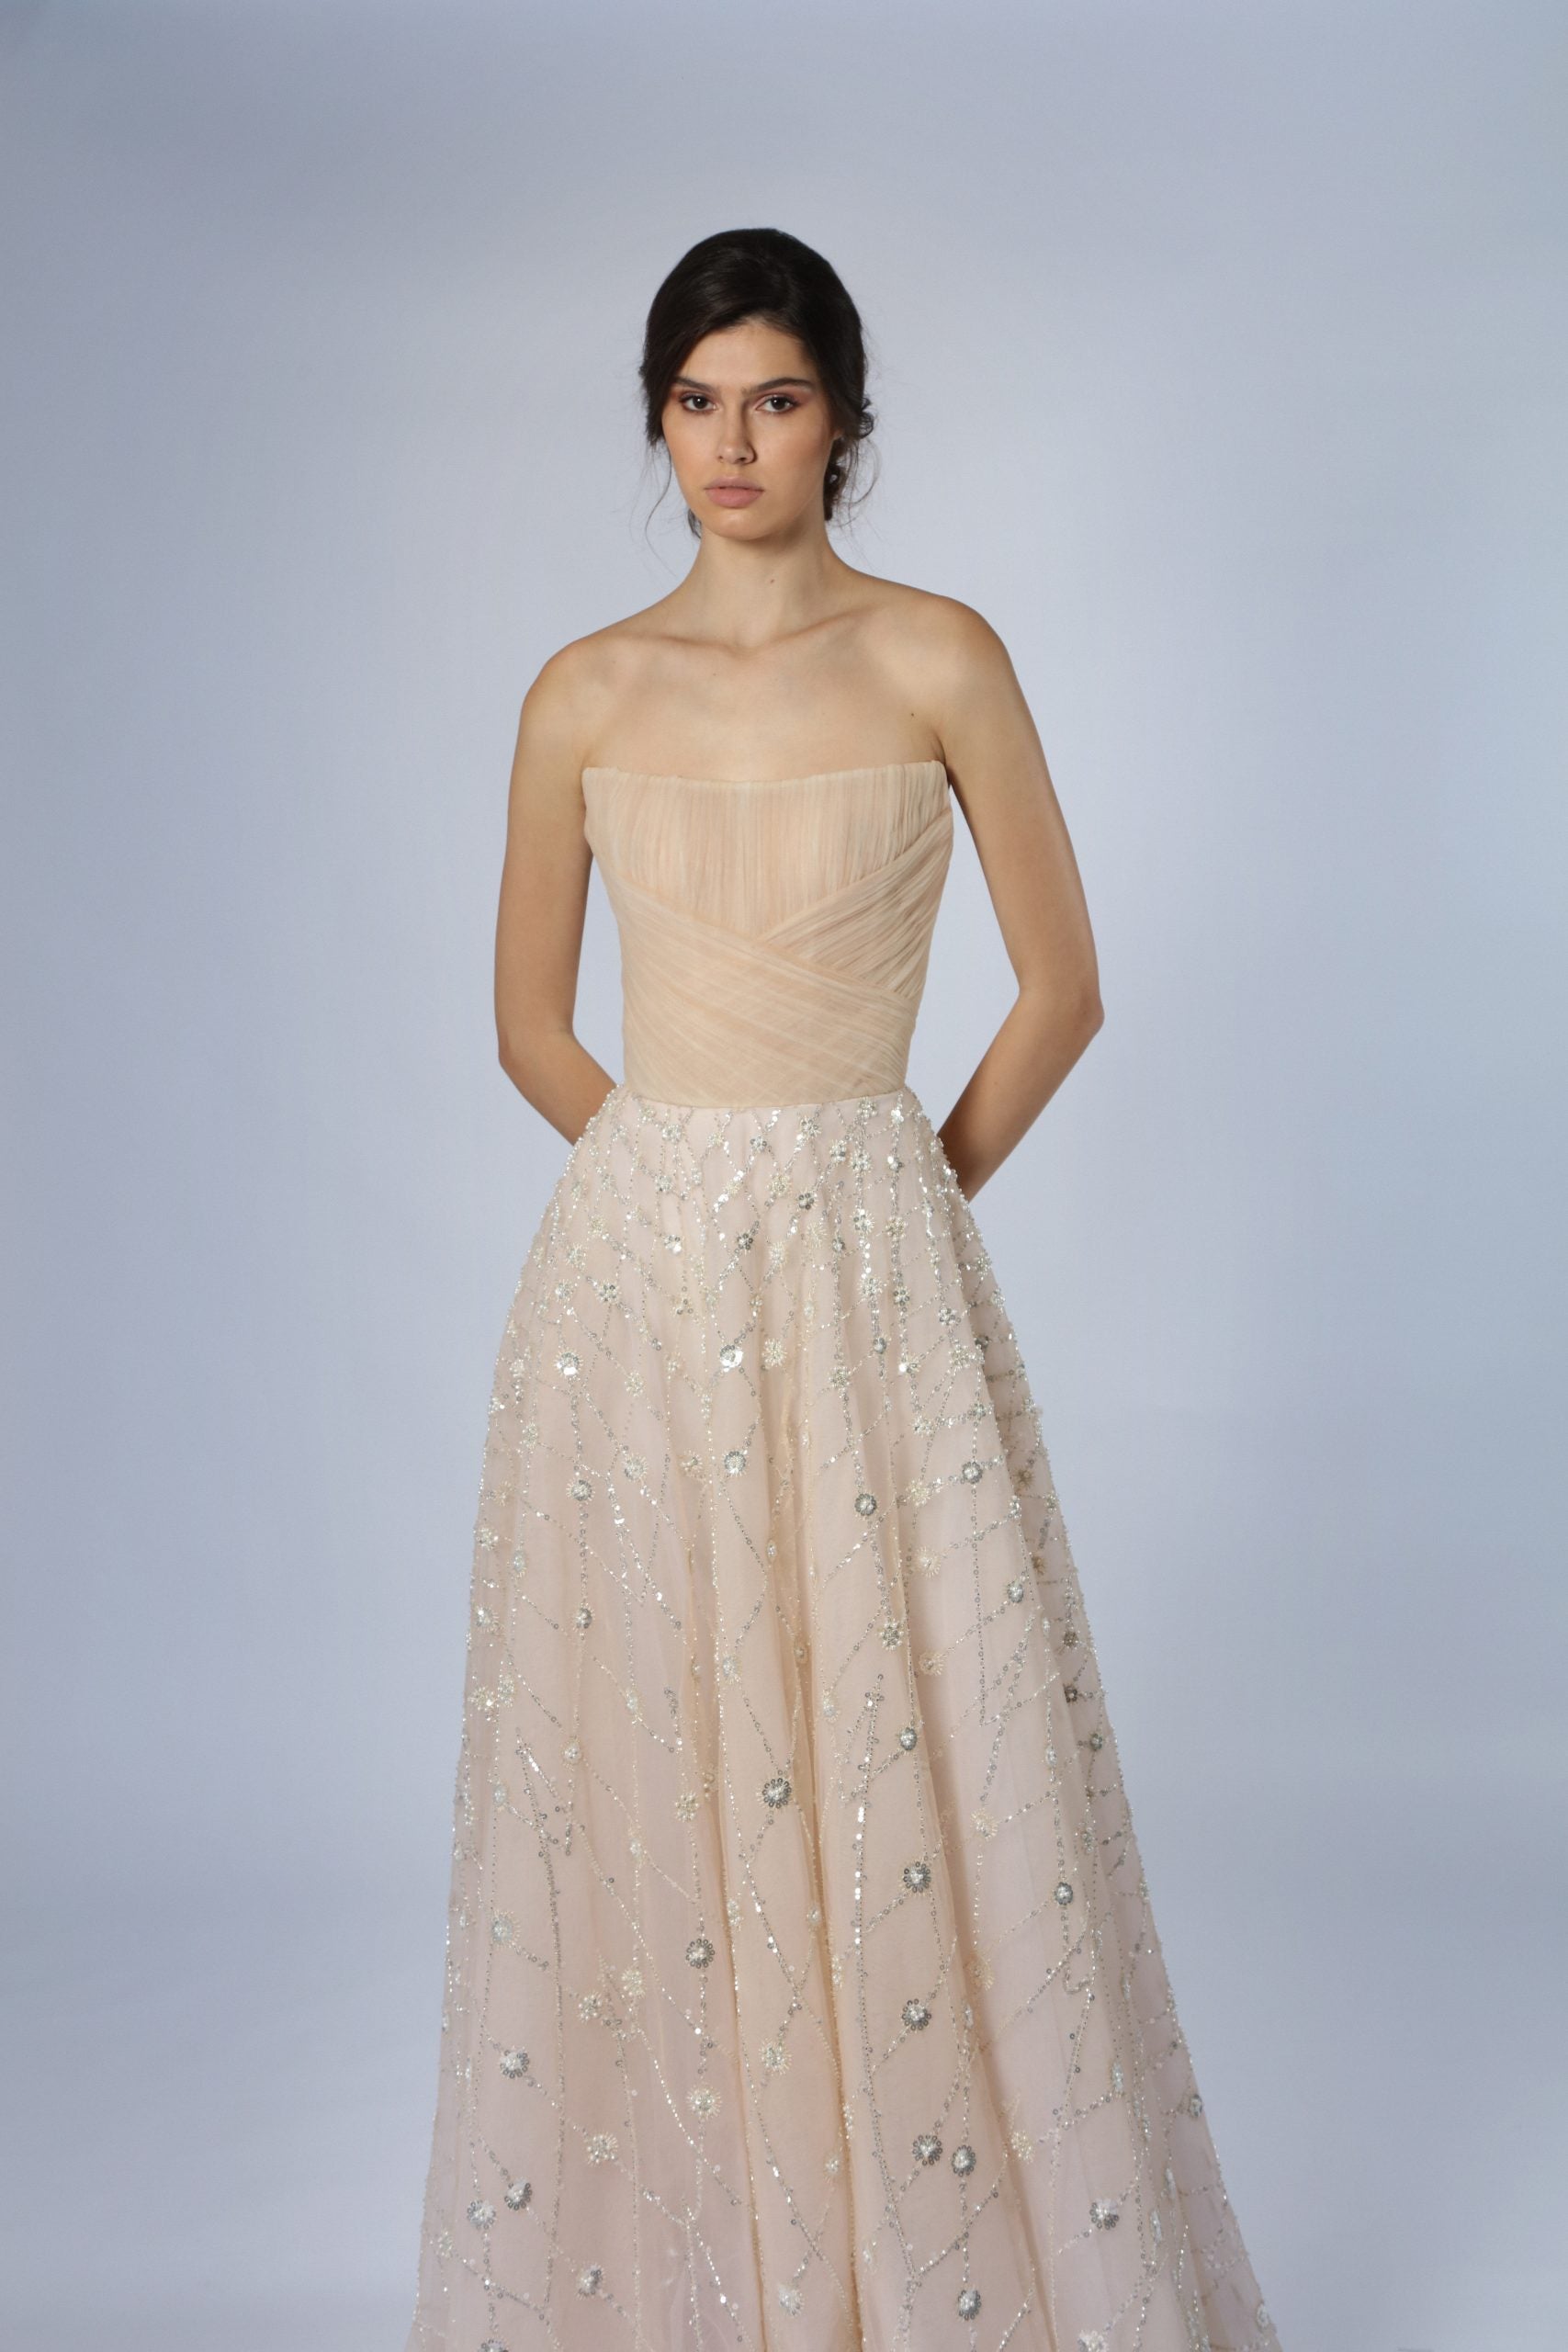 Blush A-Line Gown With Silver Embroidery by Tony Ward - Image 2